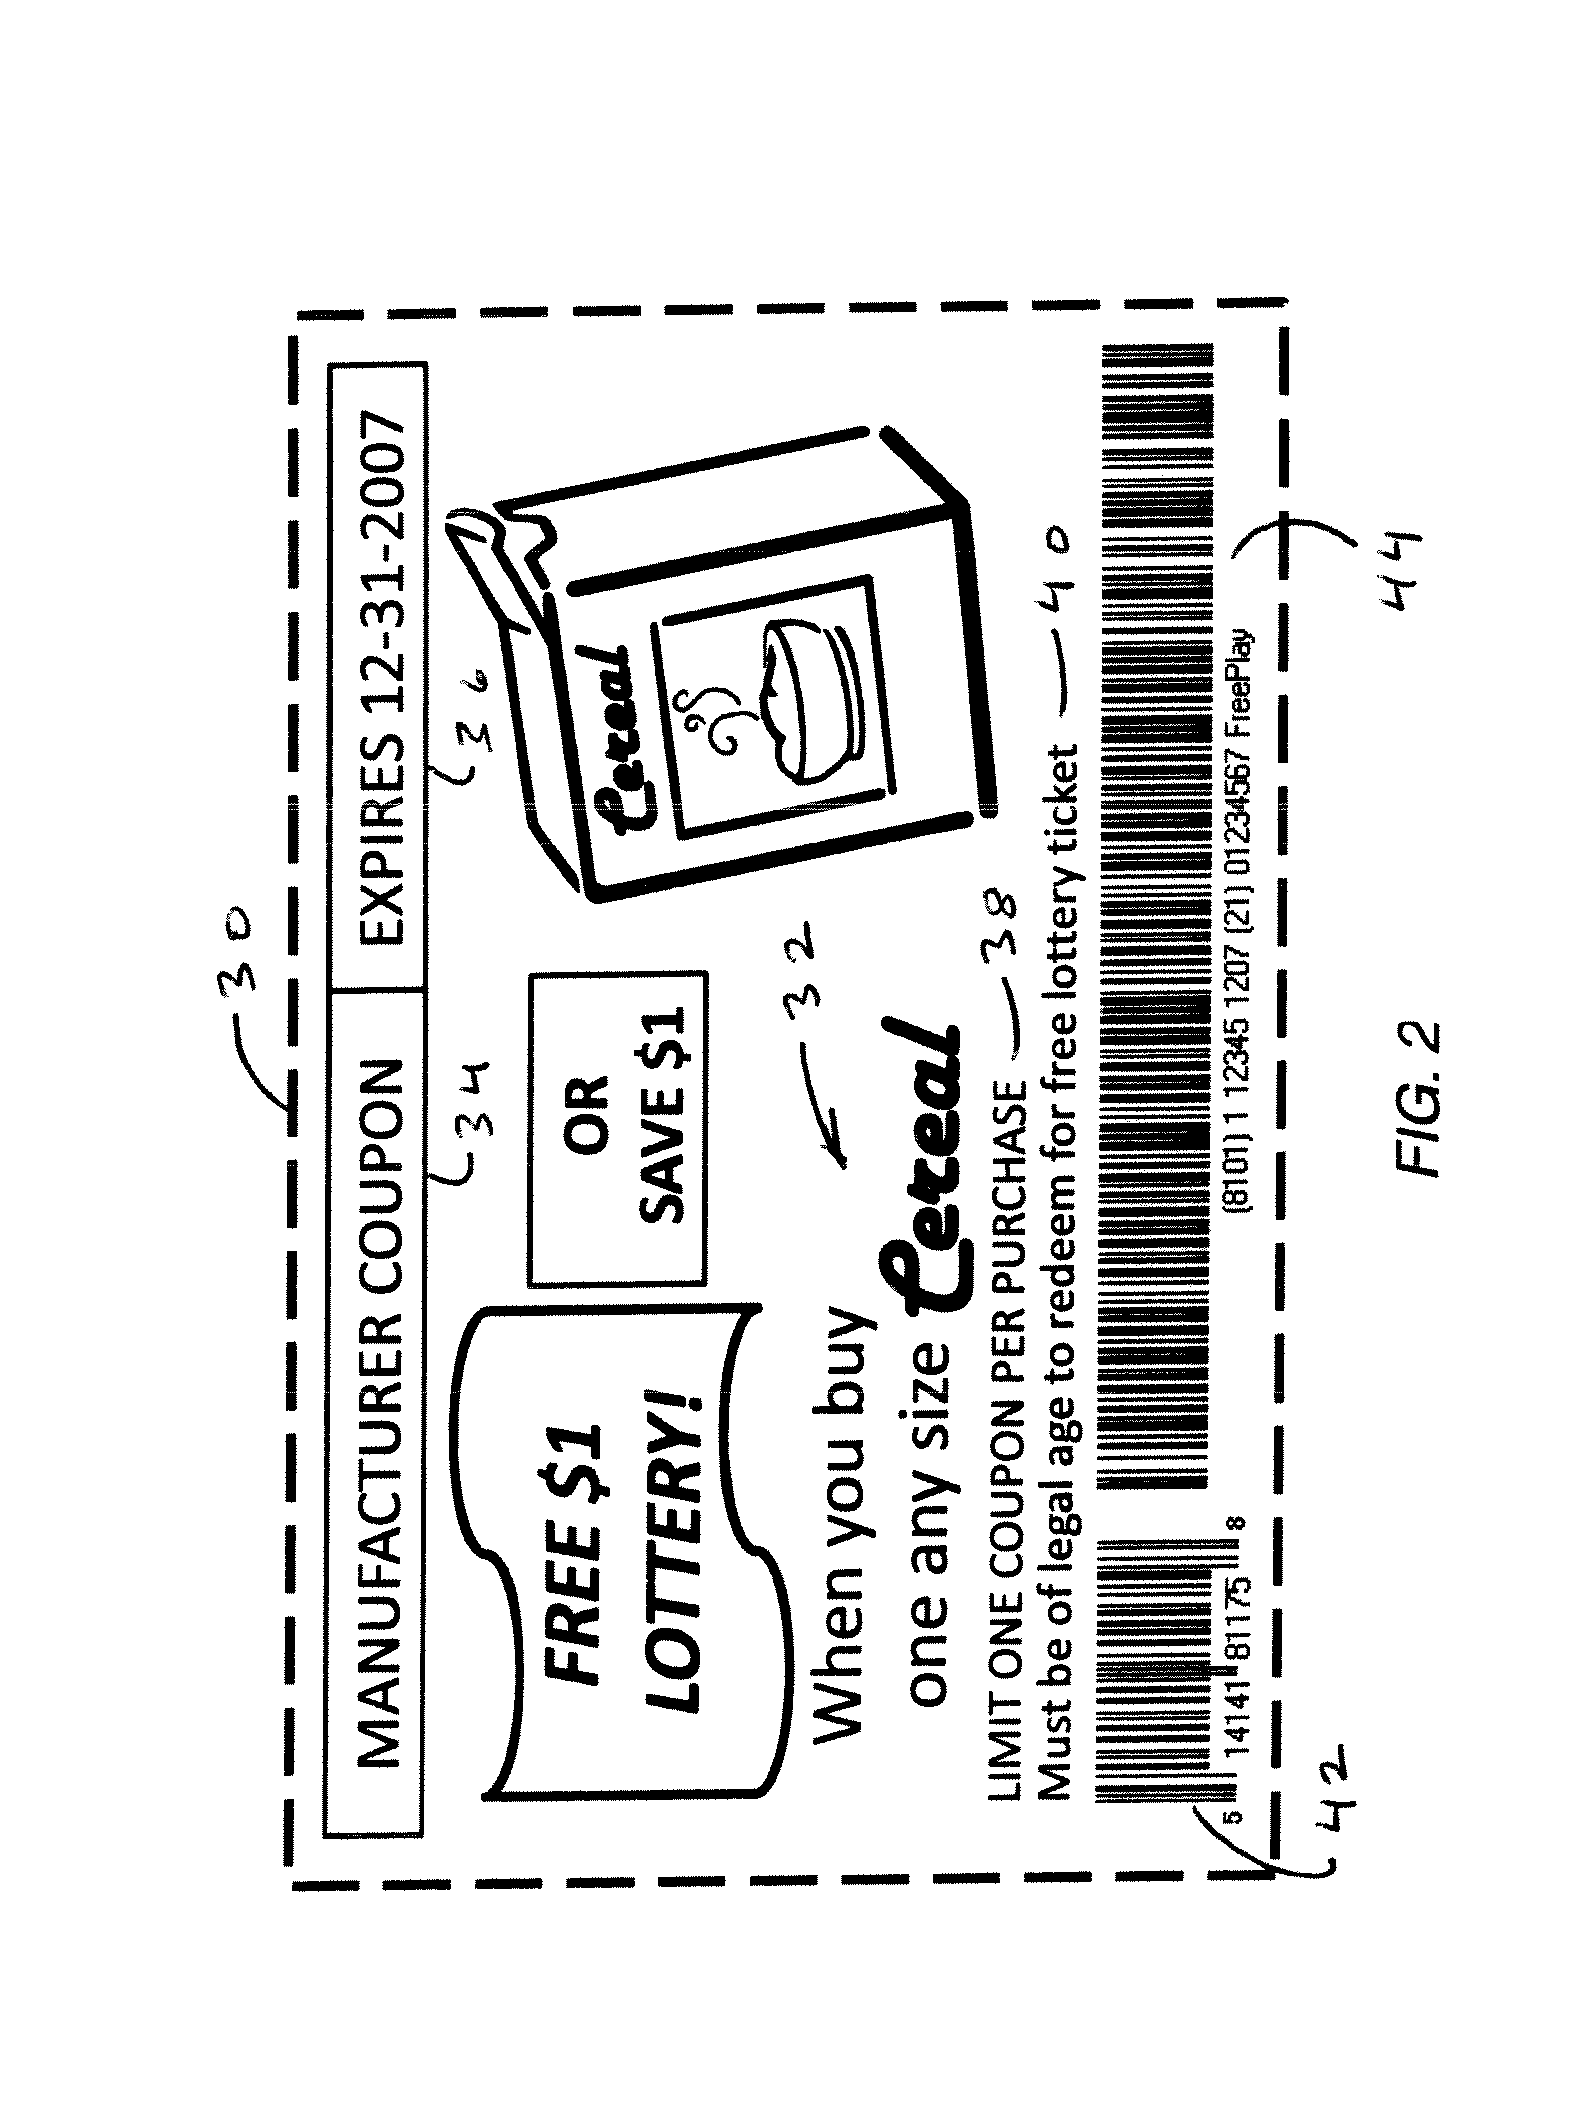 Method for point of sale consumer packaged goods and lottery promotions